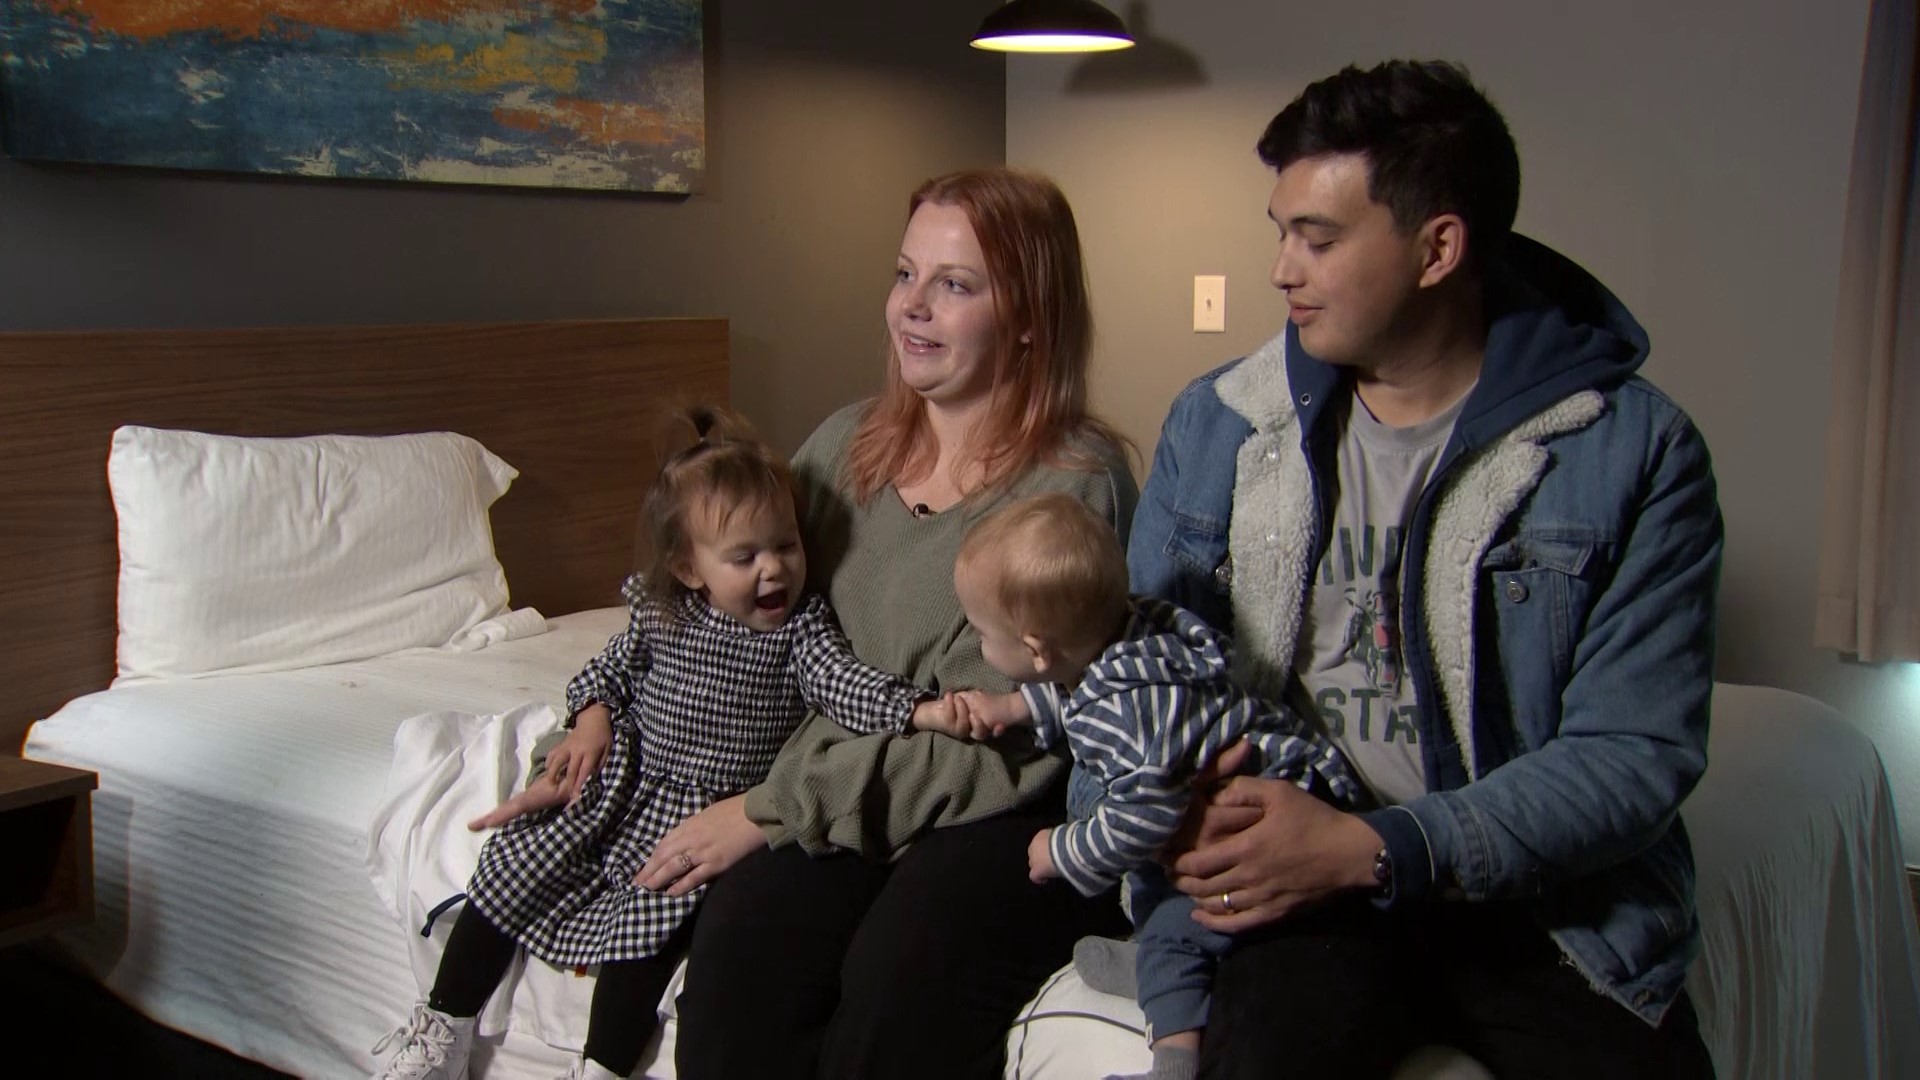 The Chandler family moved to Marysville from Mississippi this week, but on Monday, their first night in their new city, their U-Haul was stolen.